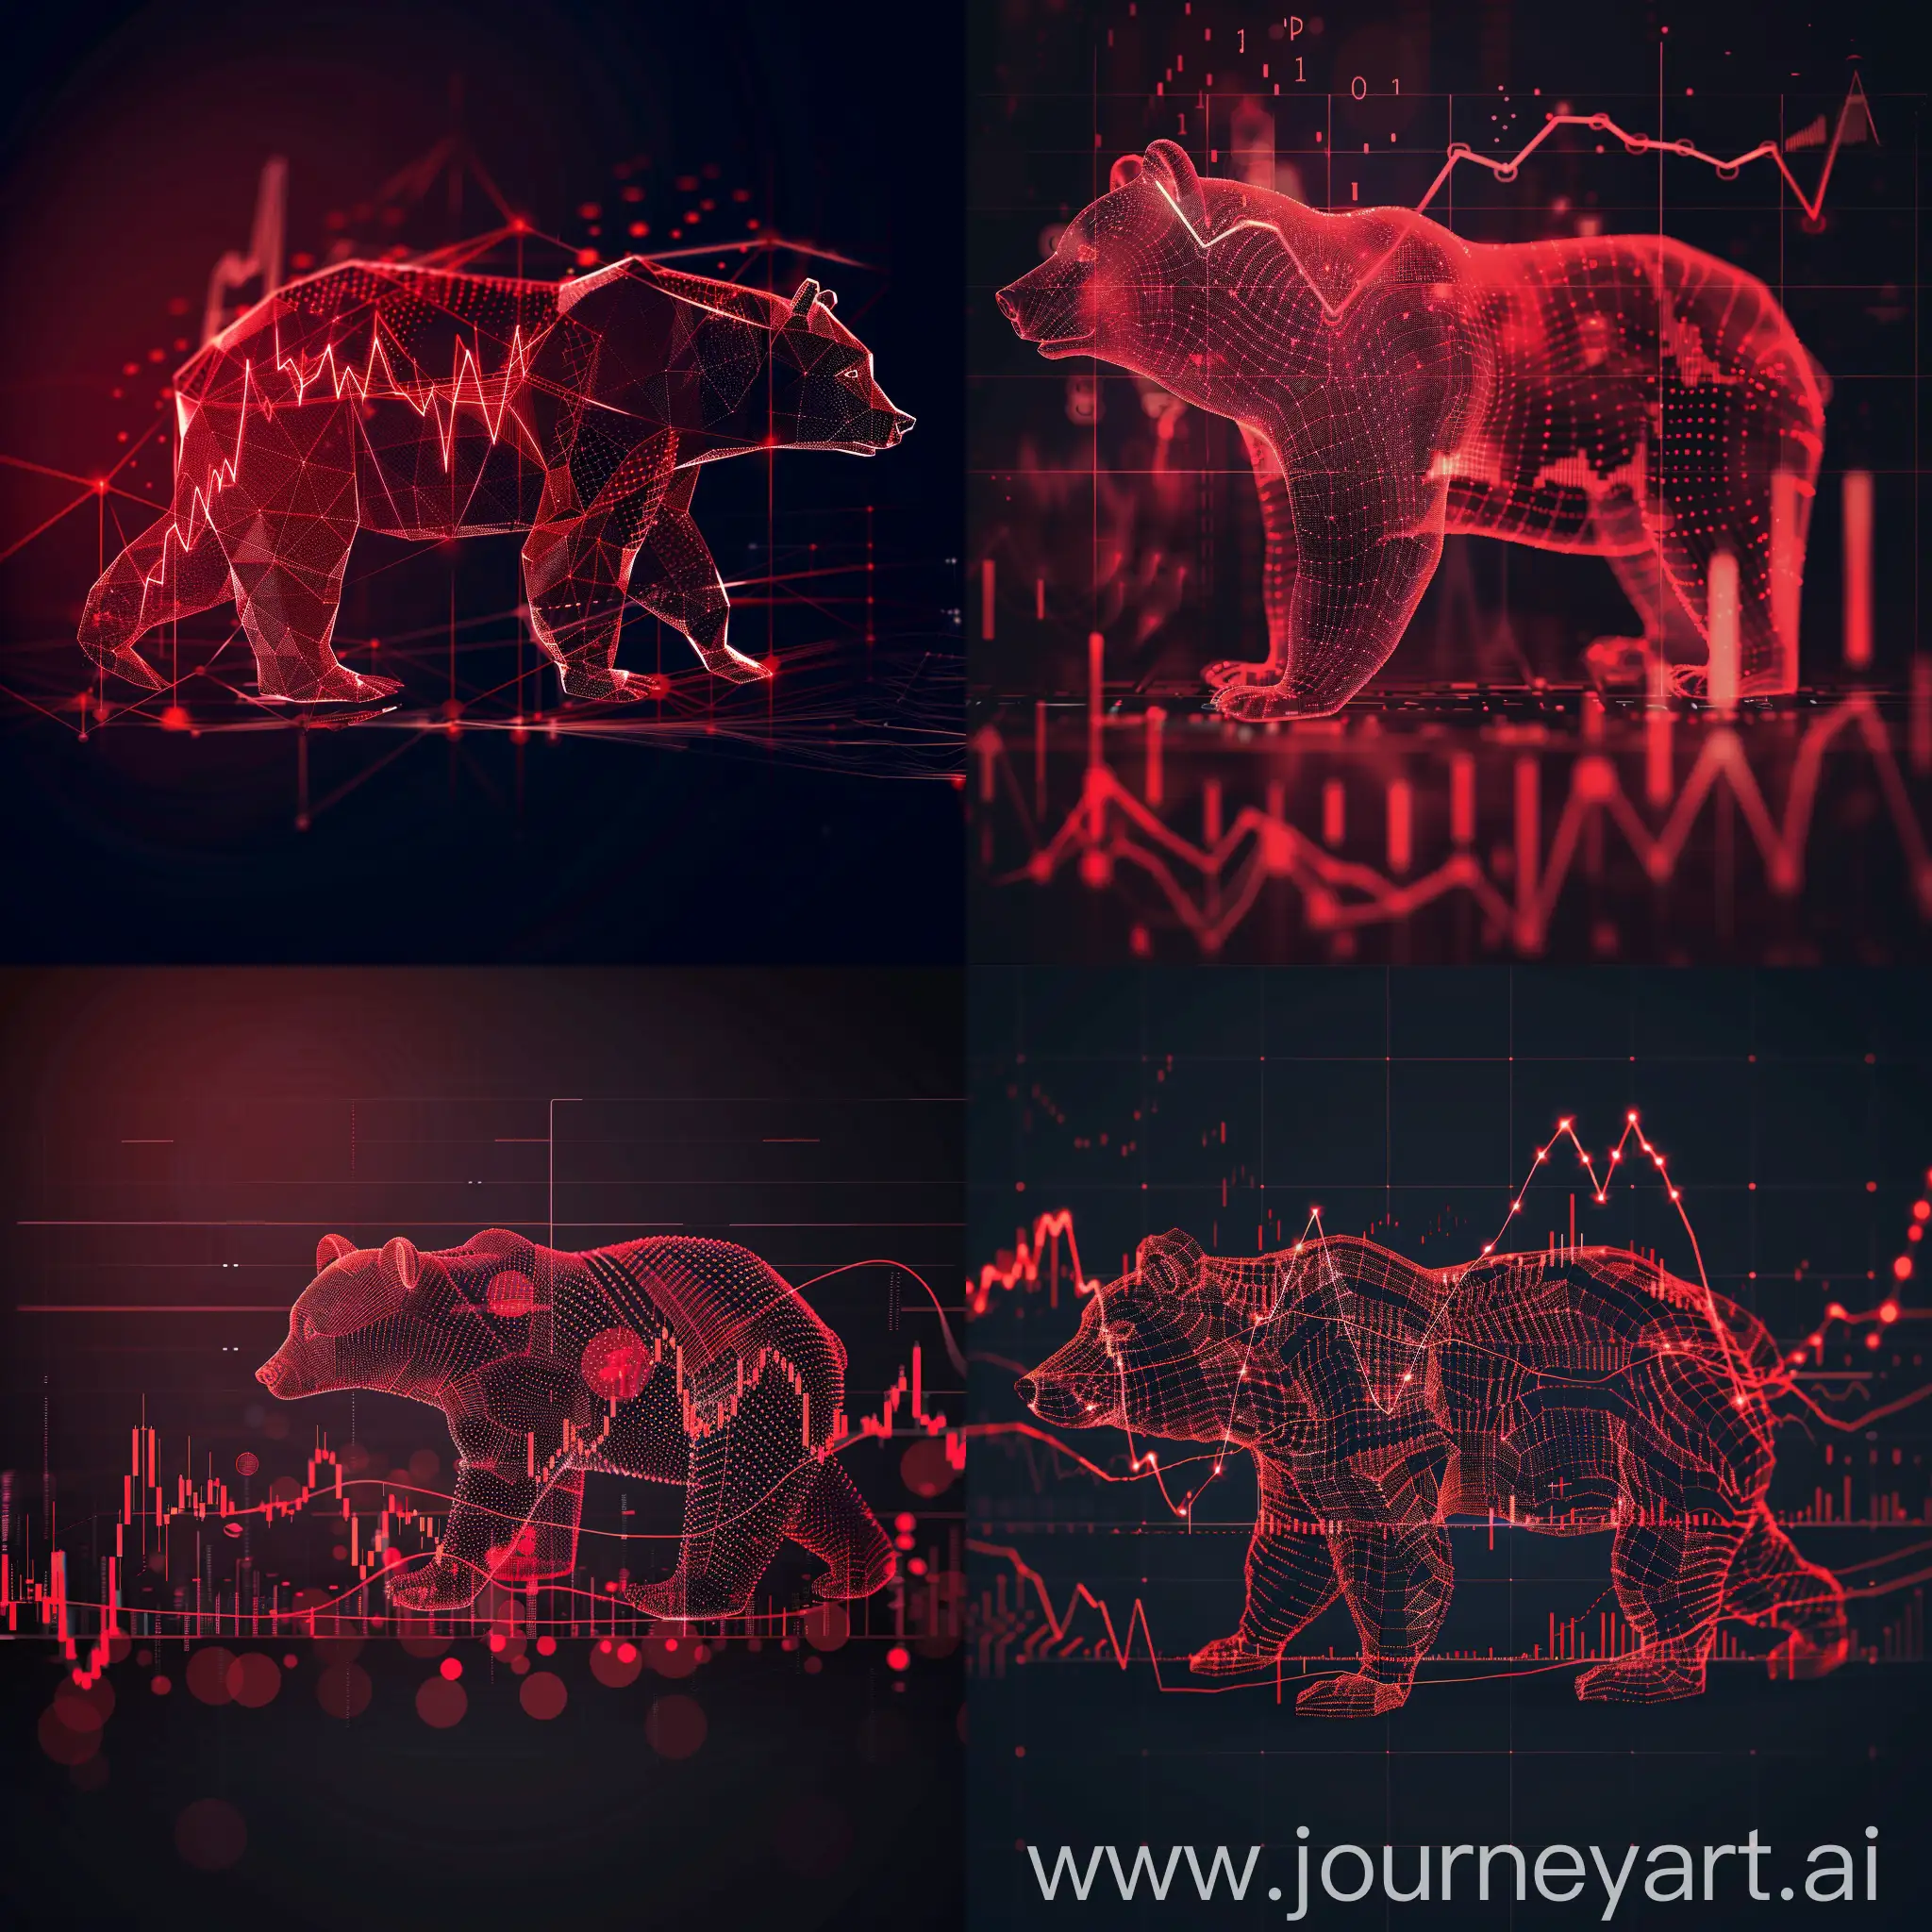 Abstract red bear forex chart hologram on dark background, financial concept Add a trading chart to the image